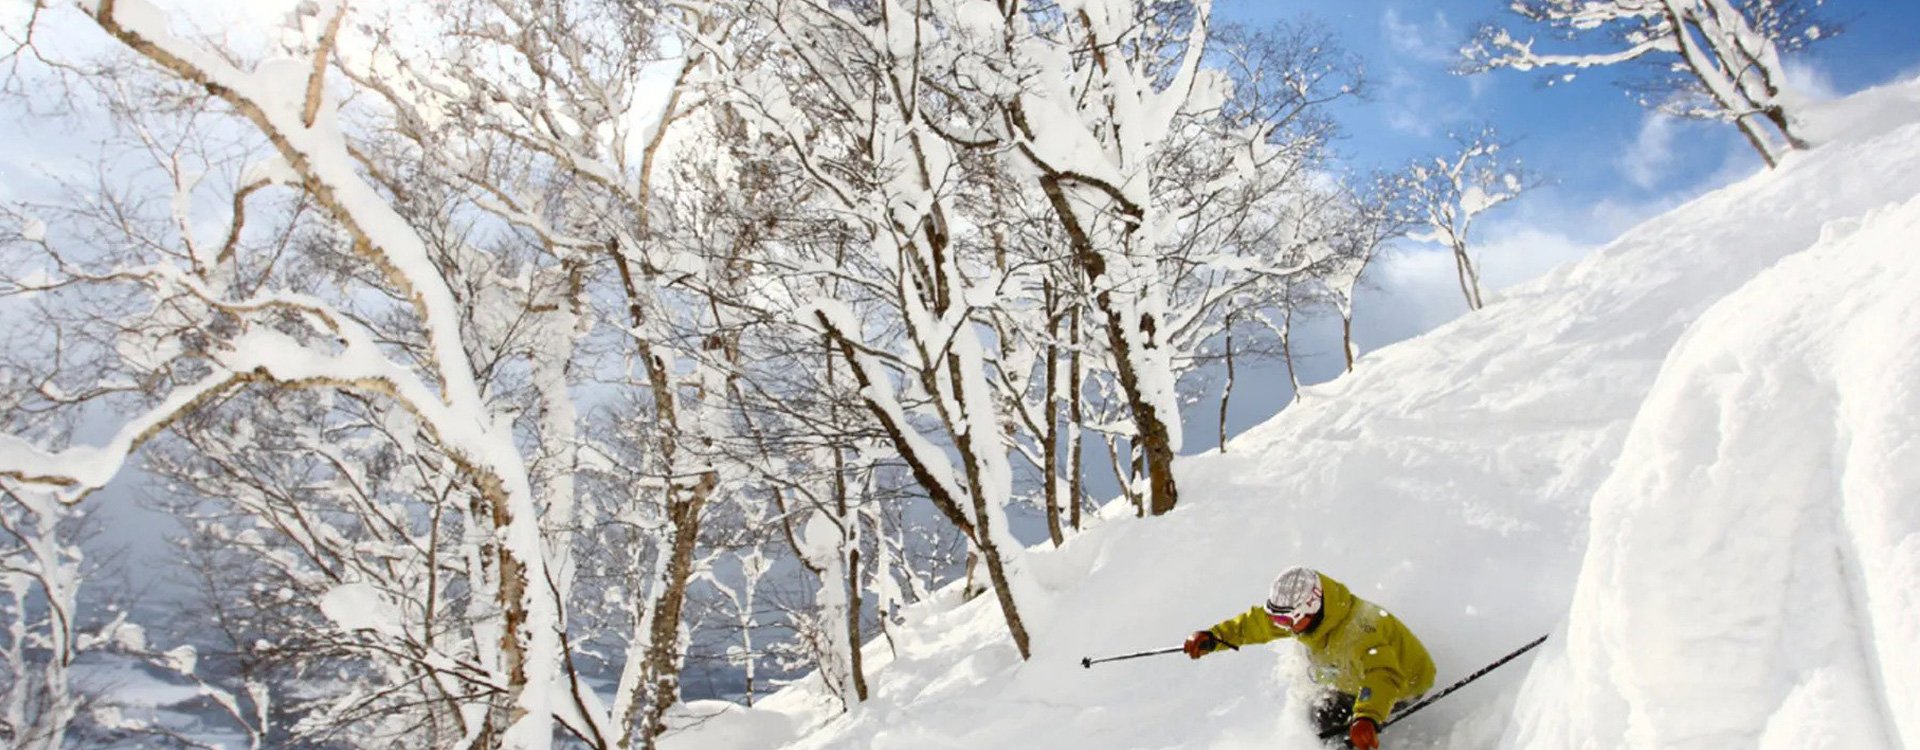 Skiing With Kids In Japan